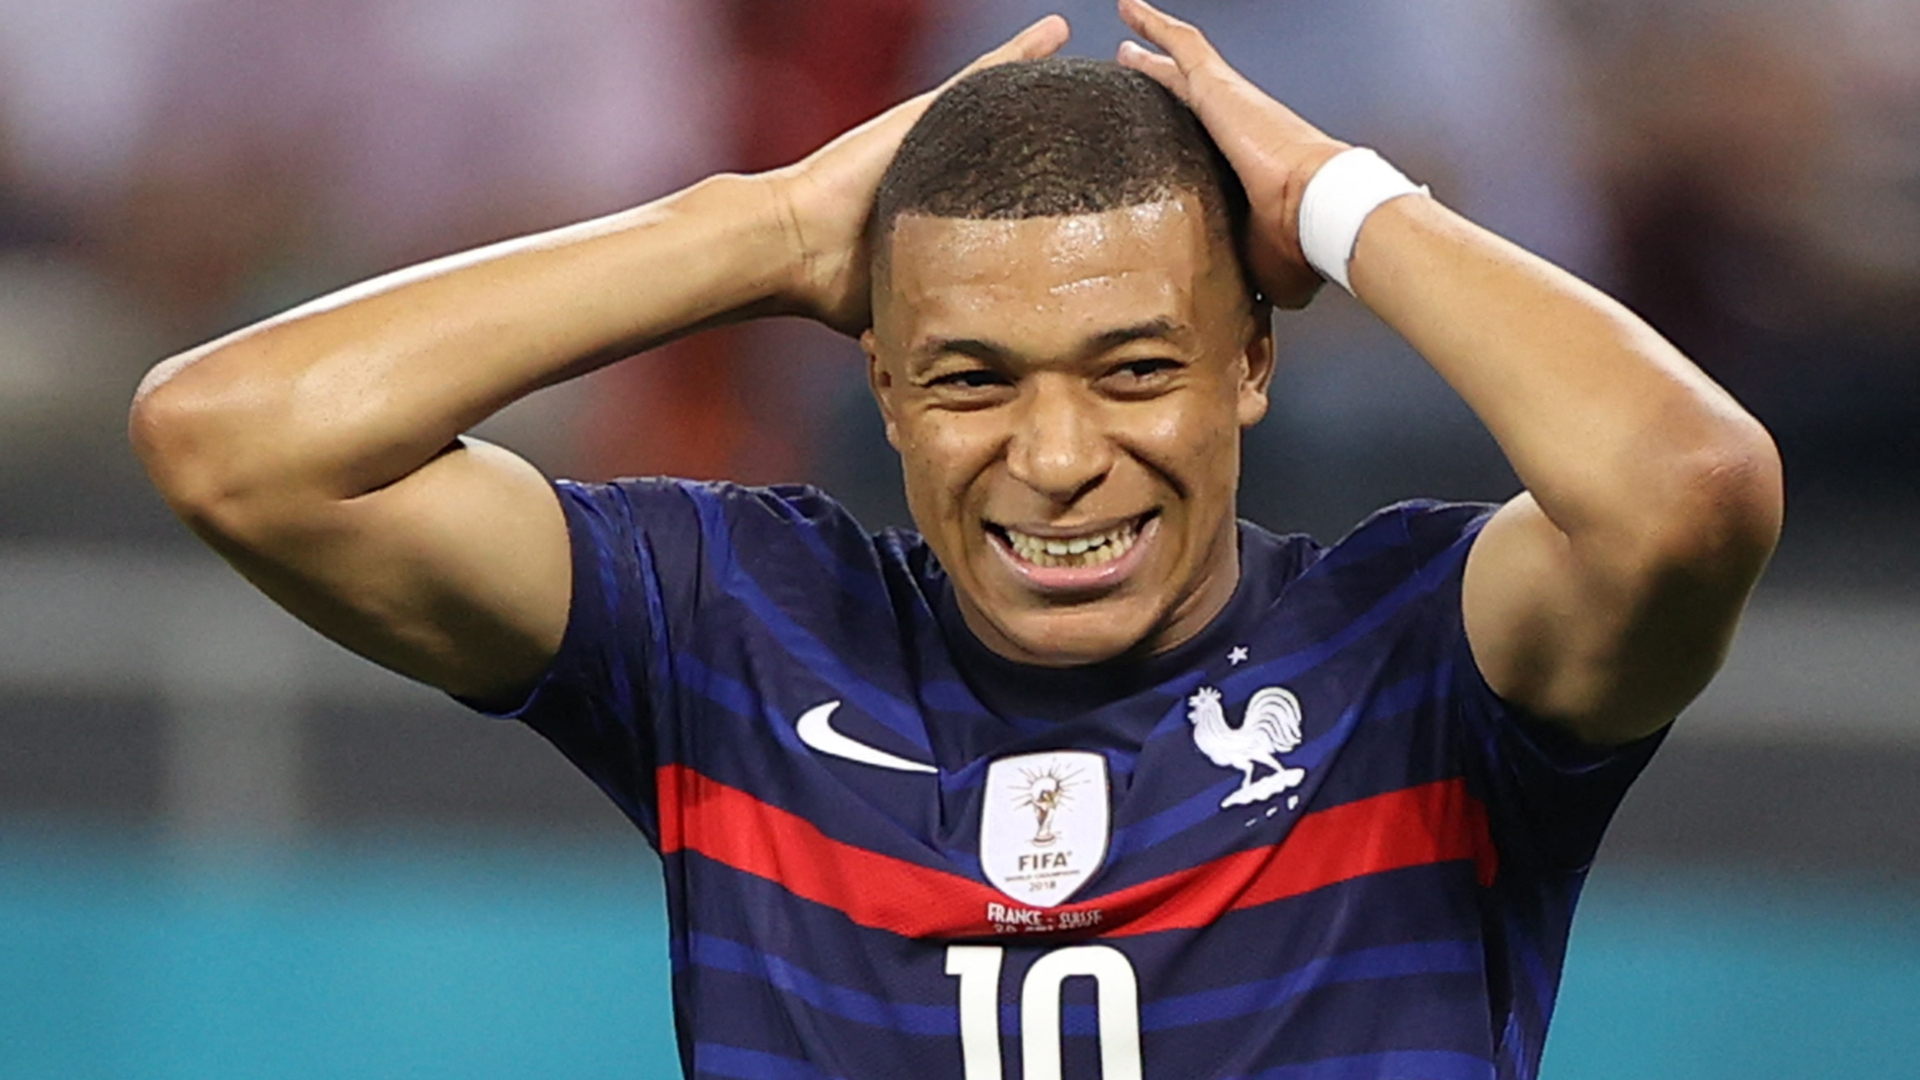 '0 goals and 1 assist' - How poor was Kylian Mbappe for France in Euro 2020?